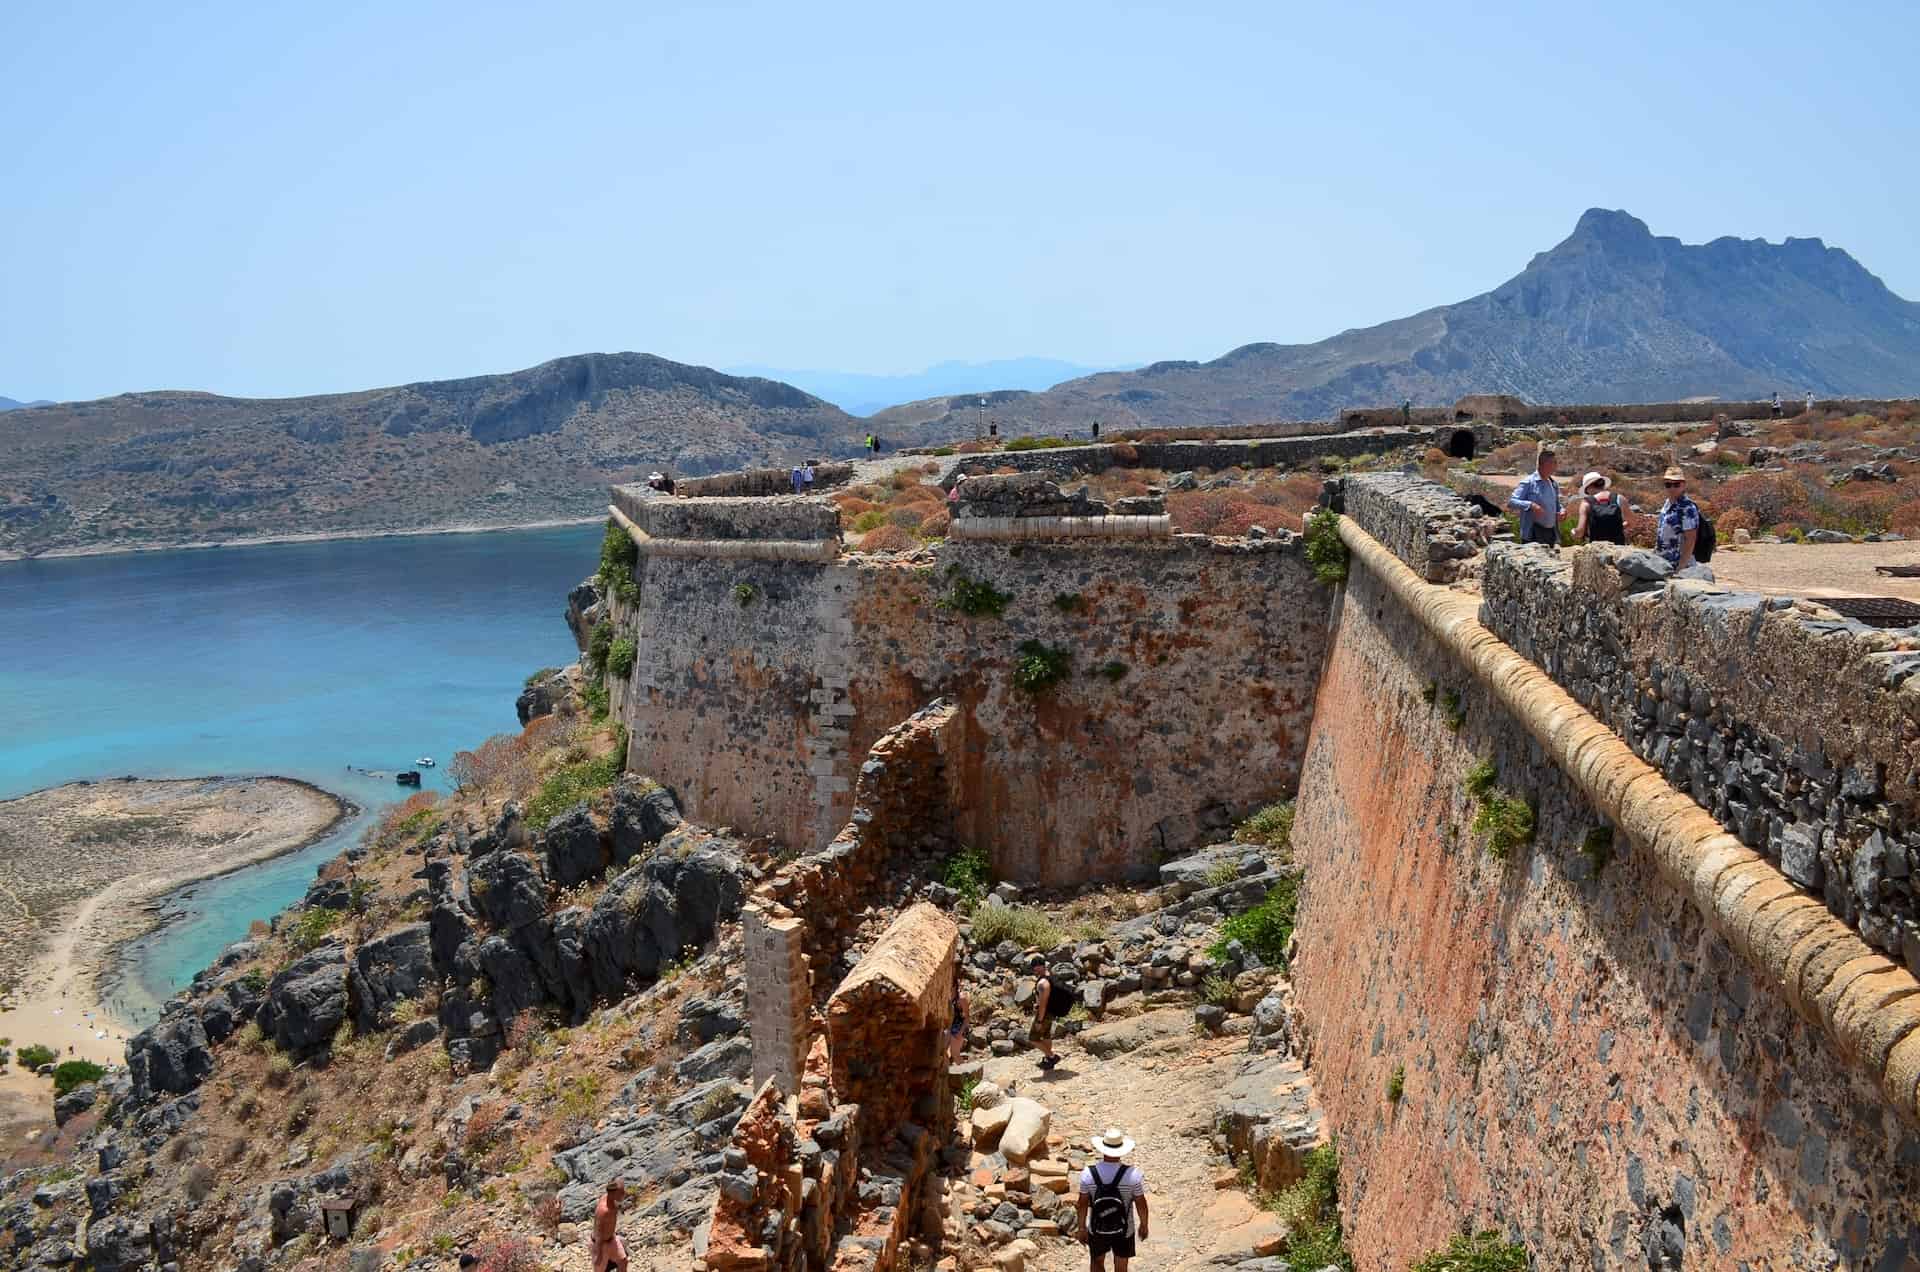 Eastern walls looking south of the Venetian fortress on Gramvousa, Crete